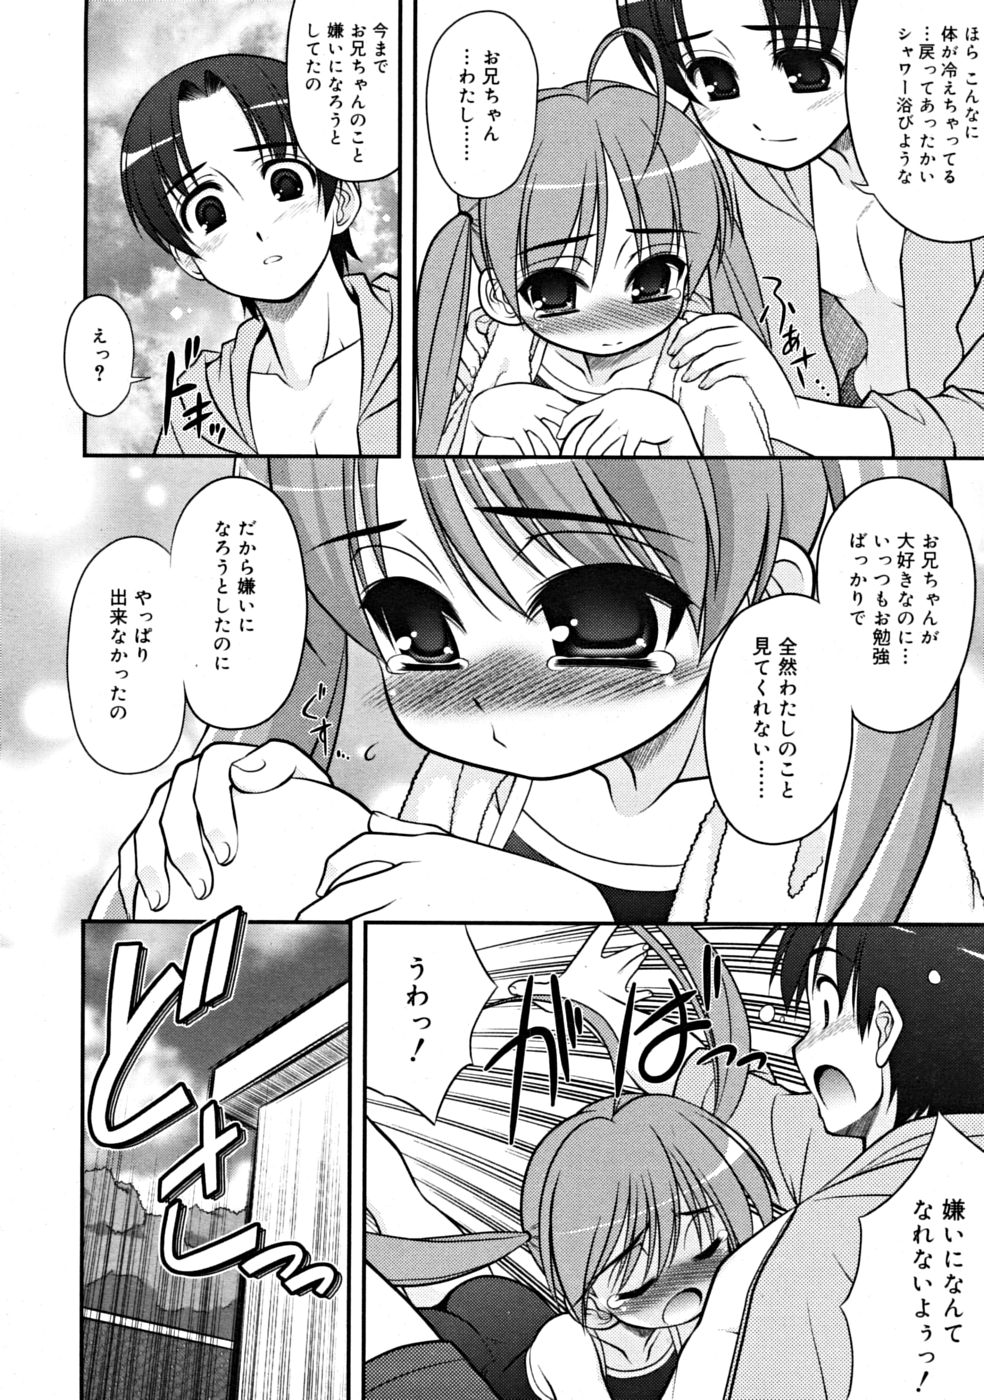 COMIC RiN 2008-09 page 30 full